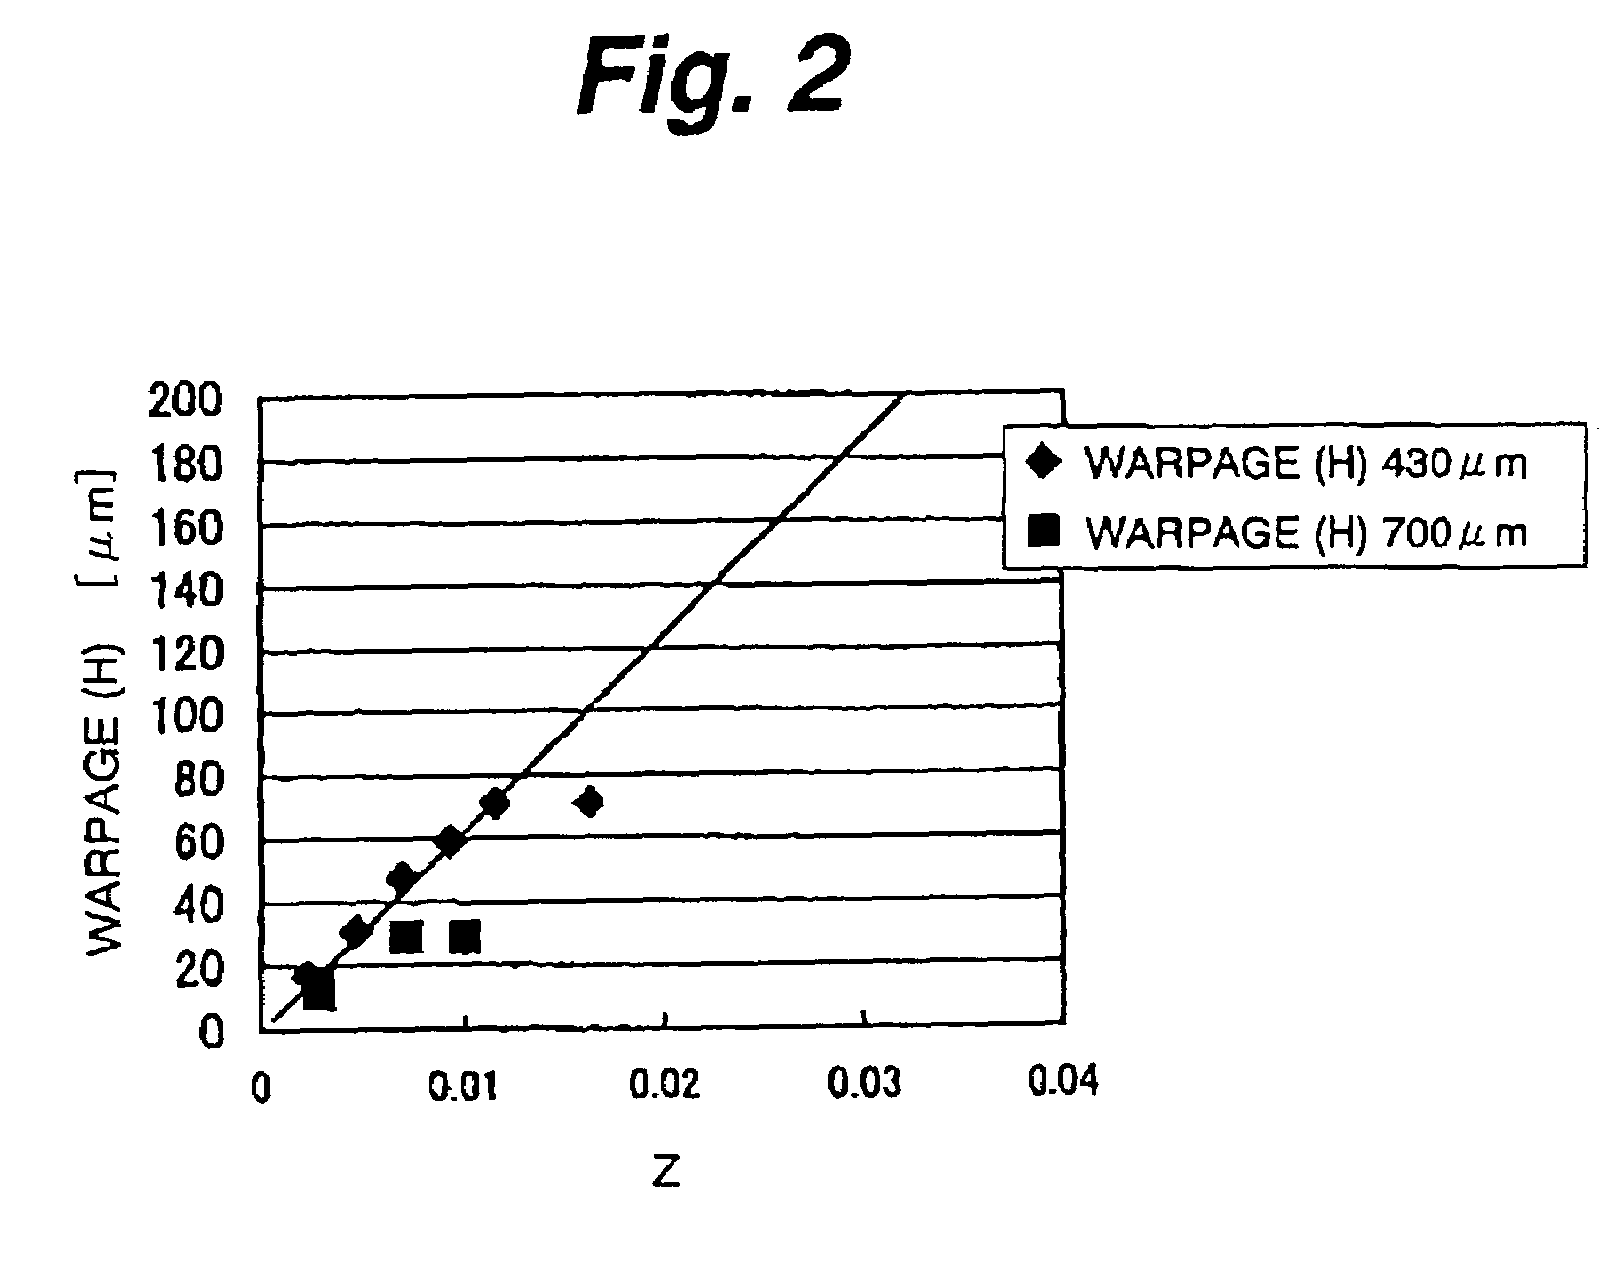 Method of manufacturing a semiconductor light emitting device utilizing a nitride III-V compound semiconductor substrate